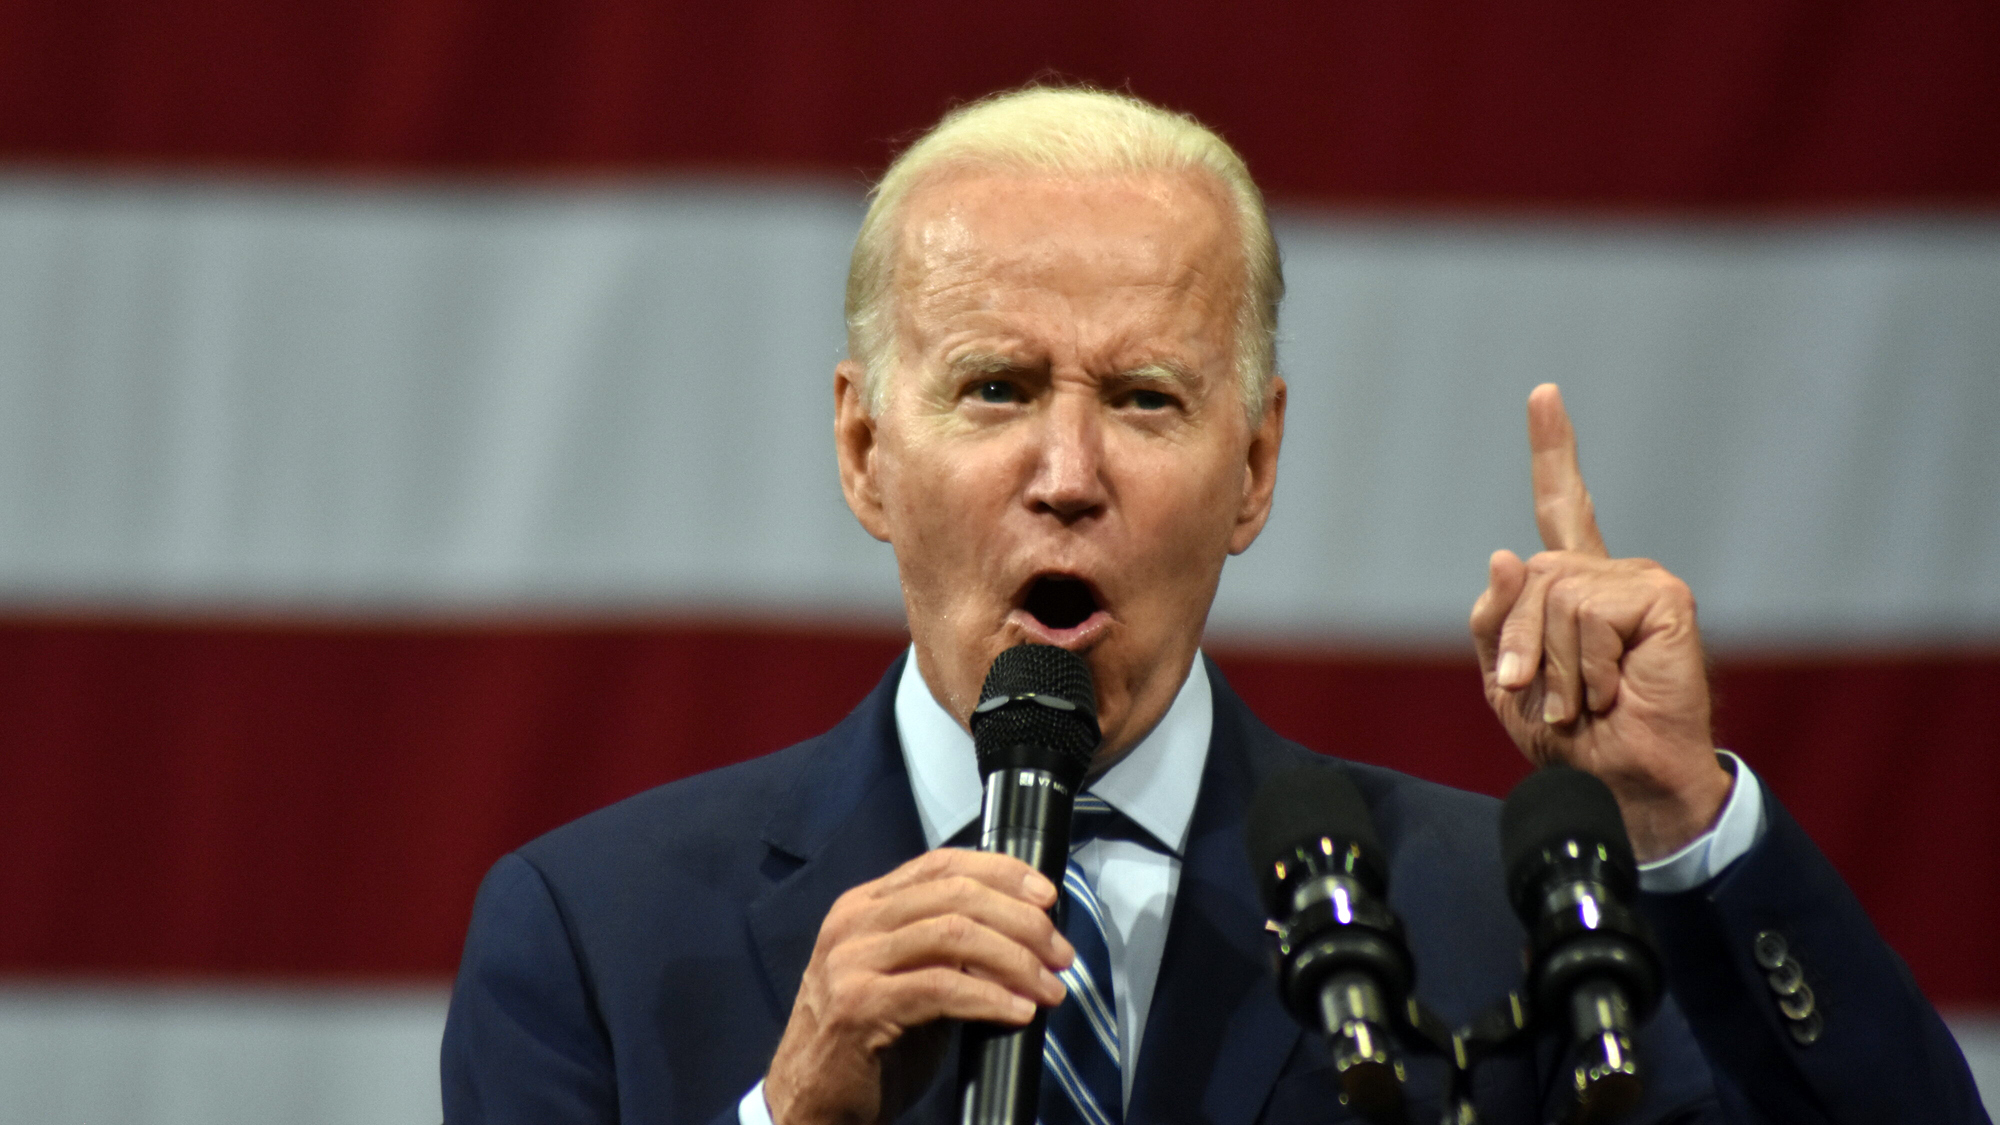 A deepfake ‘Joe Biden’ robocall told voters to stay home for primary election